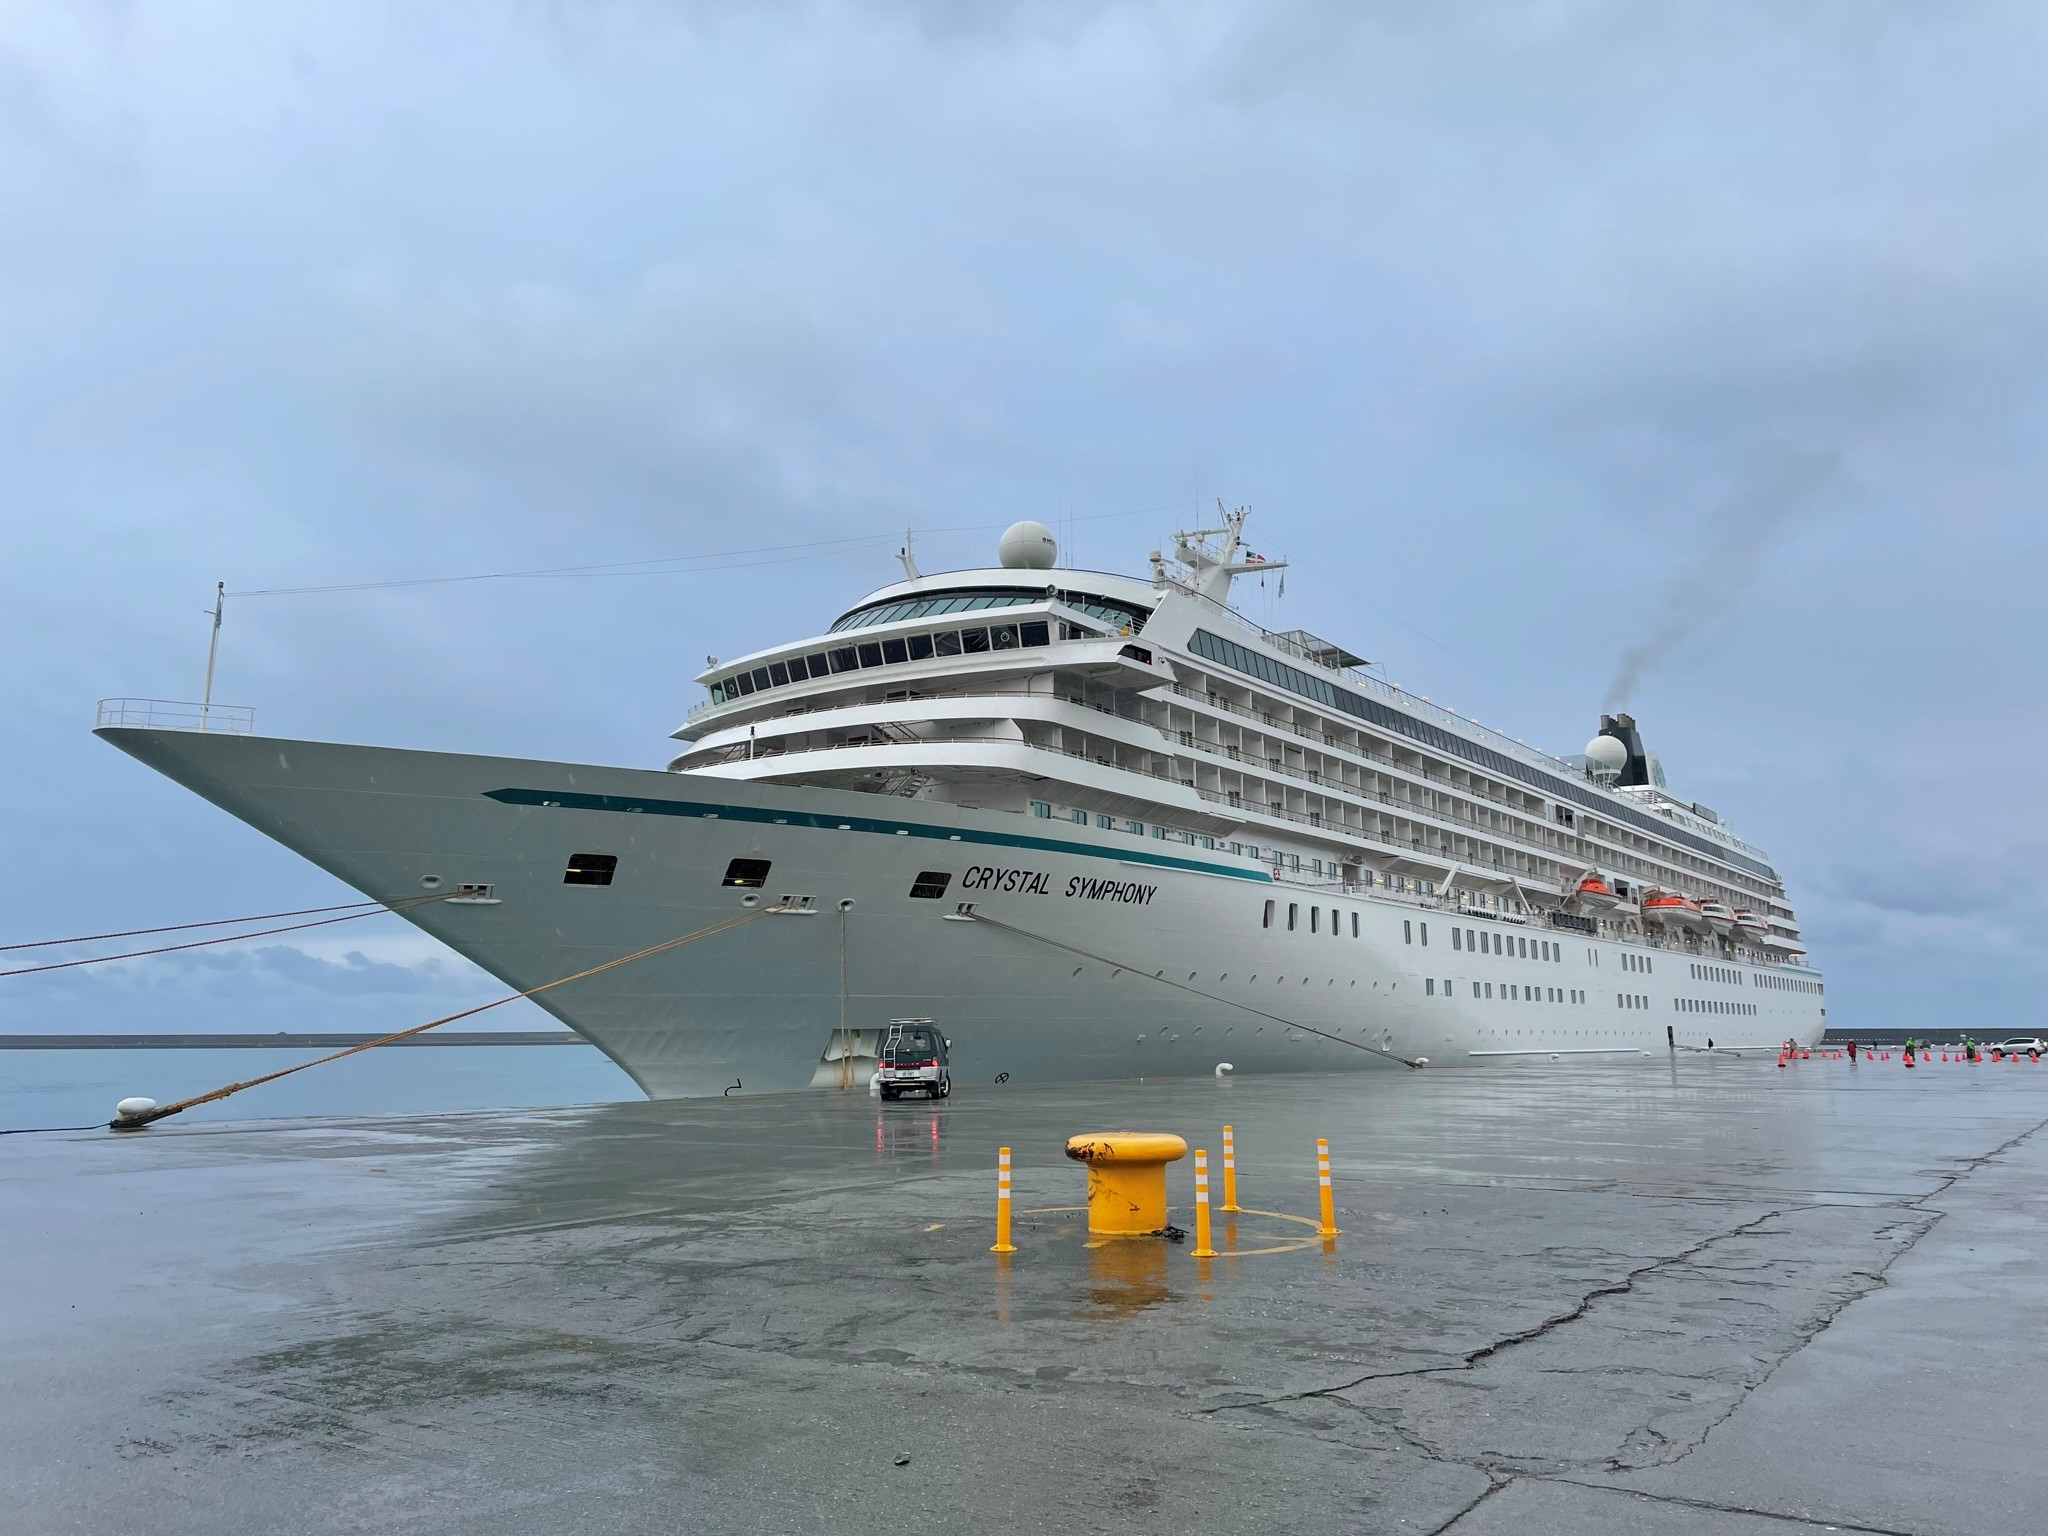 Image 4. Crystal Cruises’ Crystal Symphony docked at Port of Hualien on March 2nd, 2024